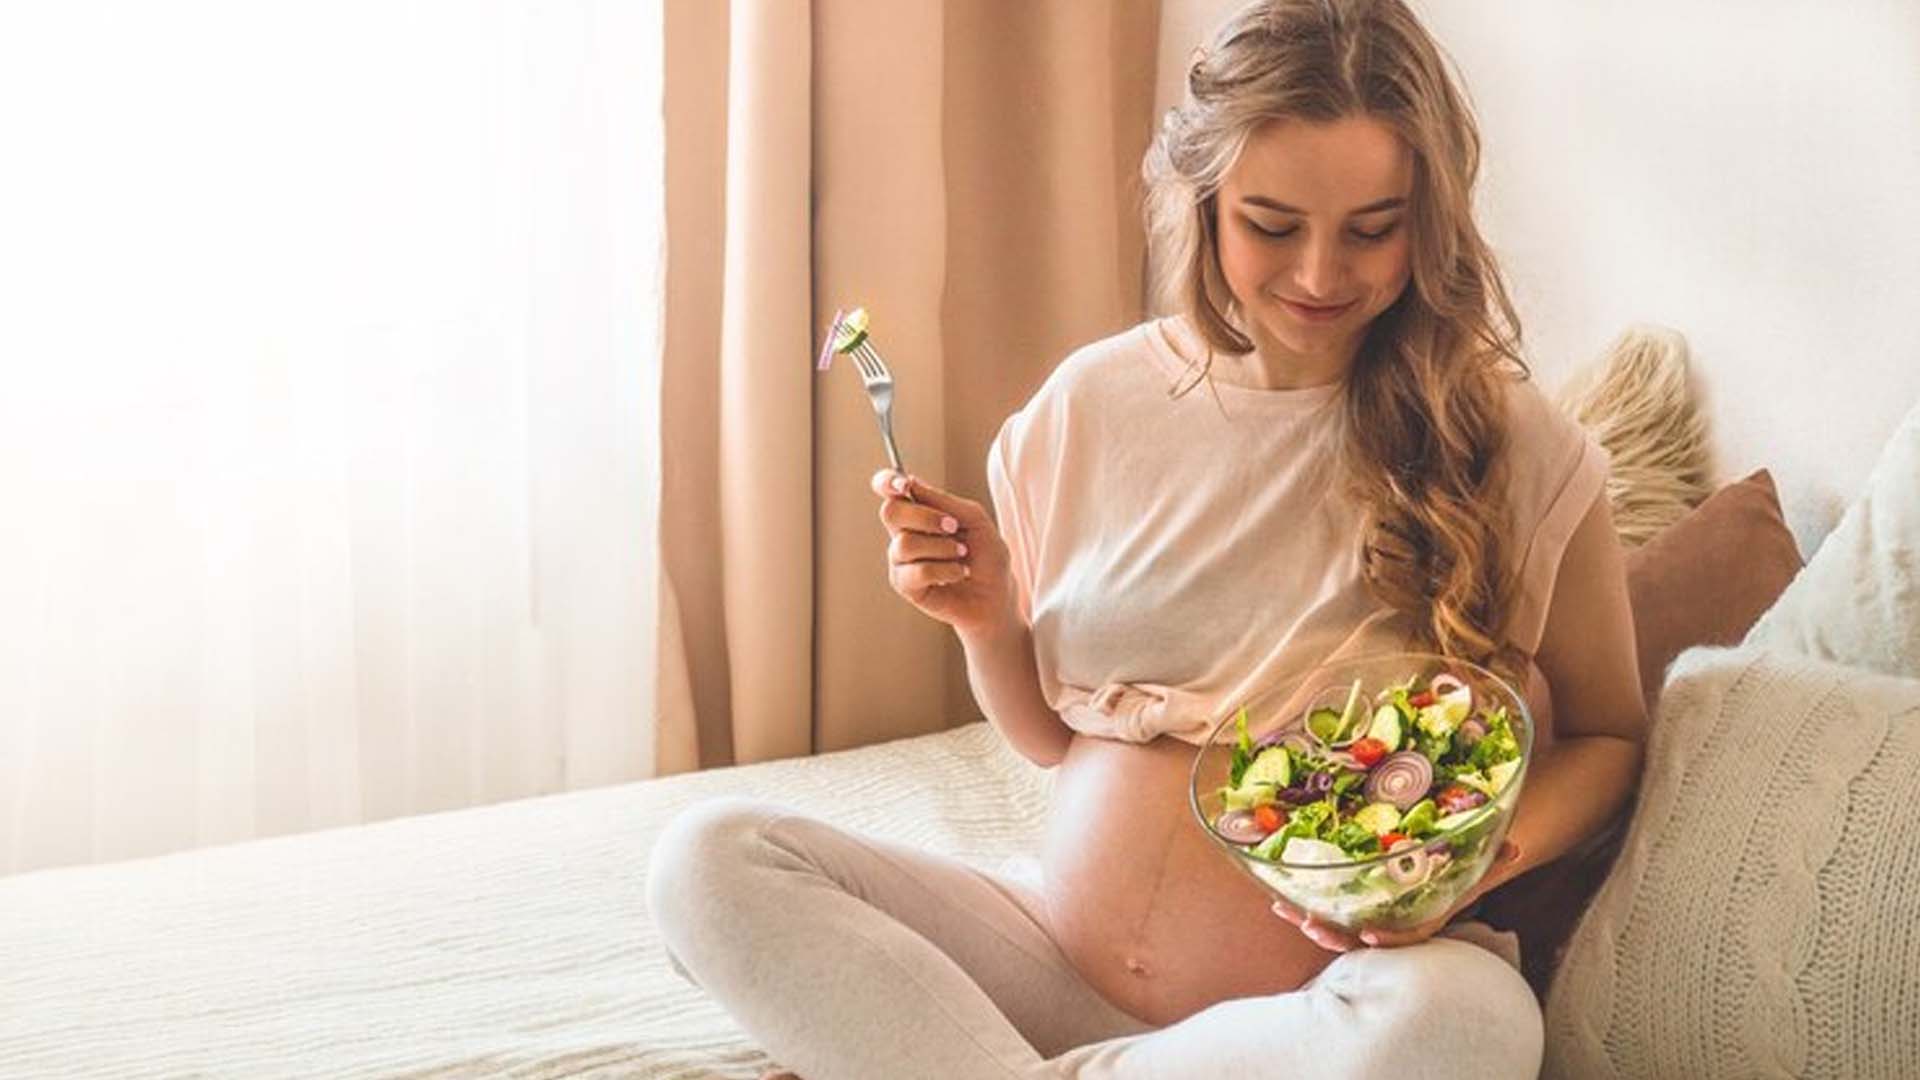 Importance of Nutrition During Pregnancy